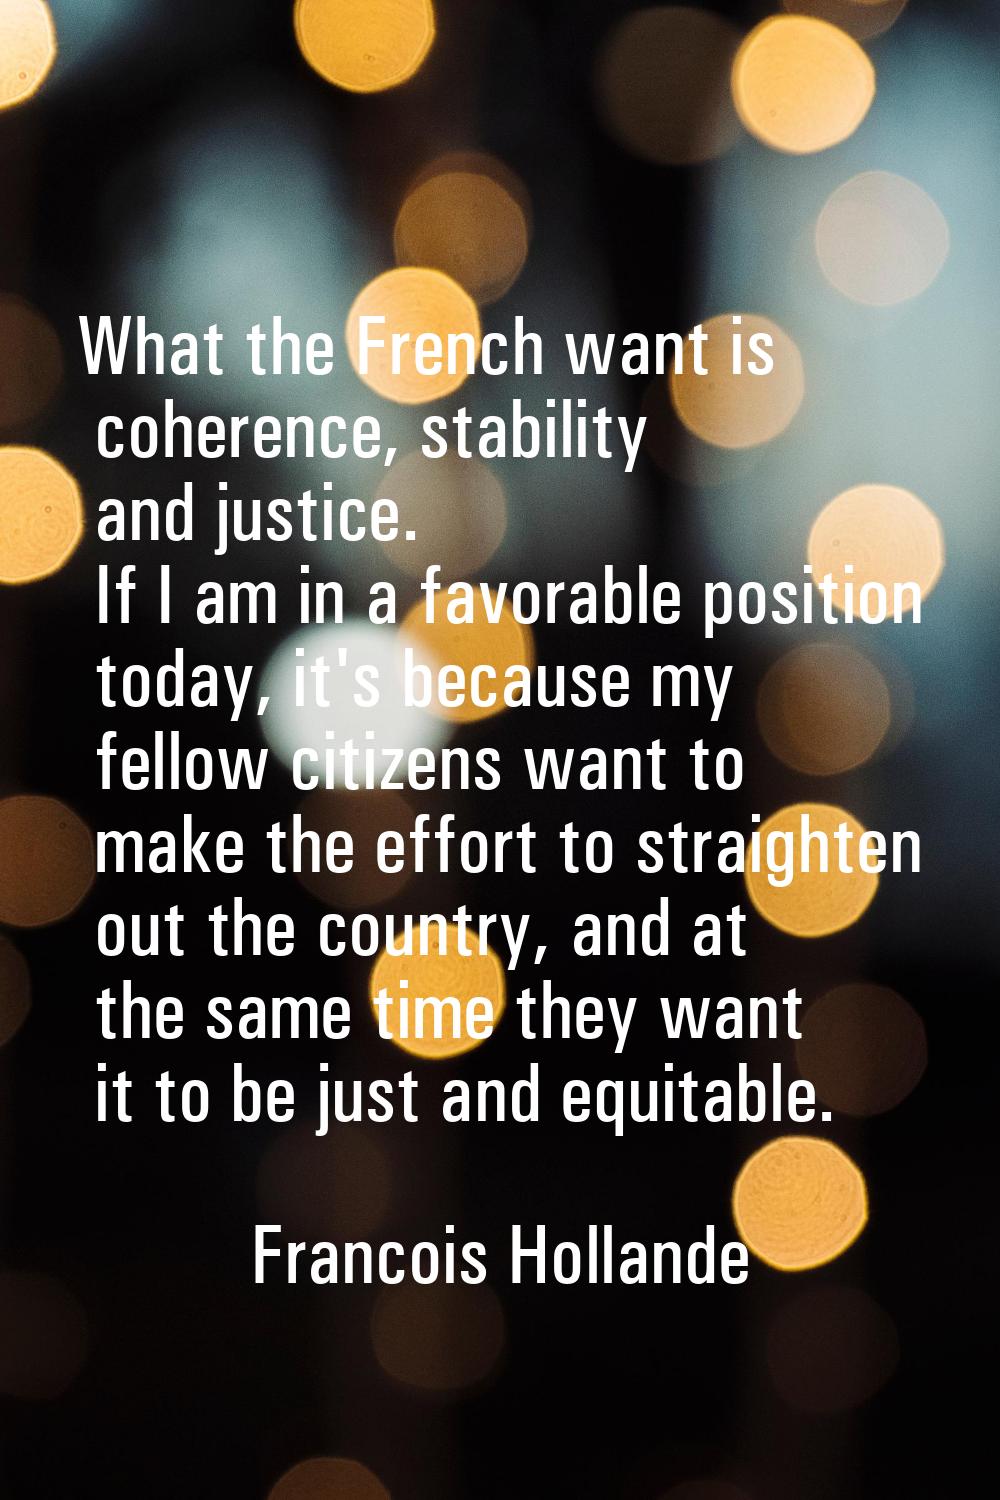 What the French want is coherence, stability and justice. If I am in a favorable position today, it